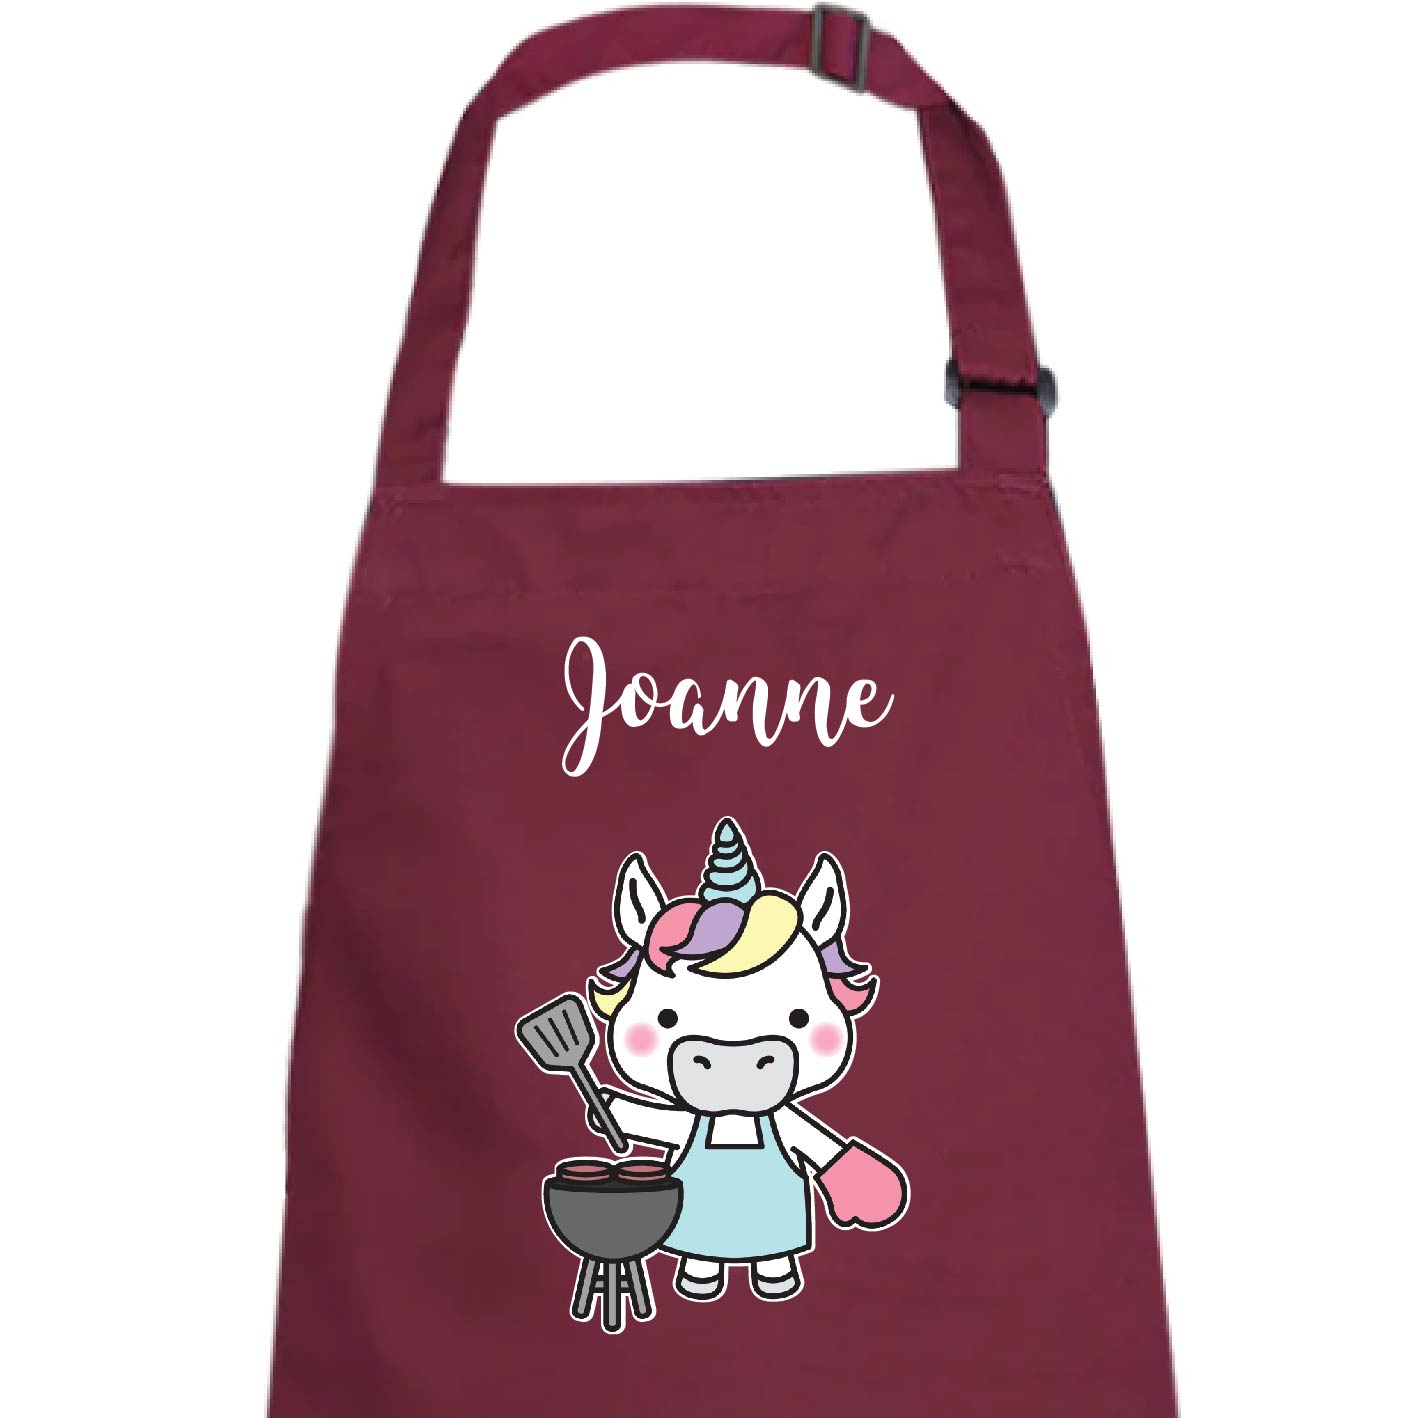 Personalised Apron - Unicorn Can Cook (Maroon)